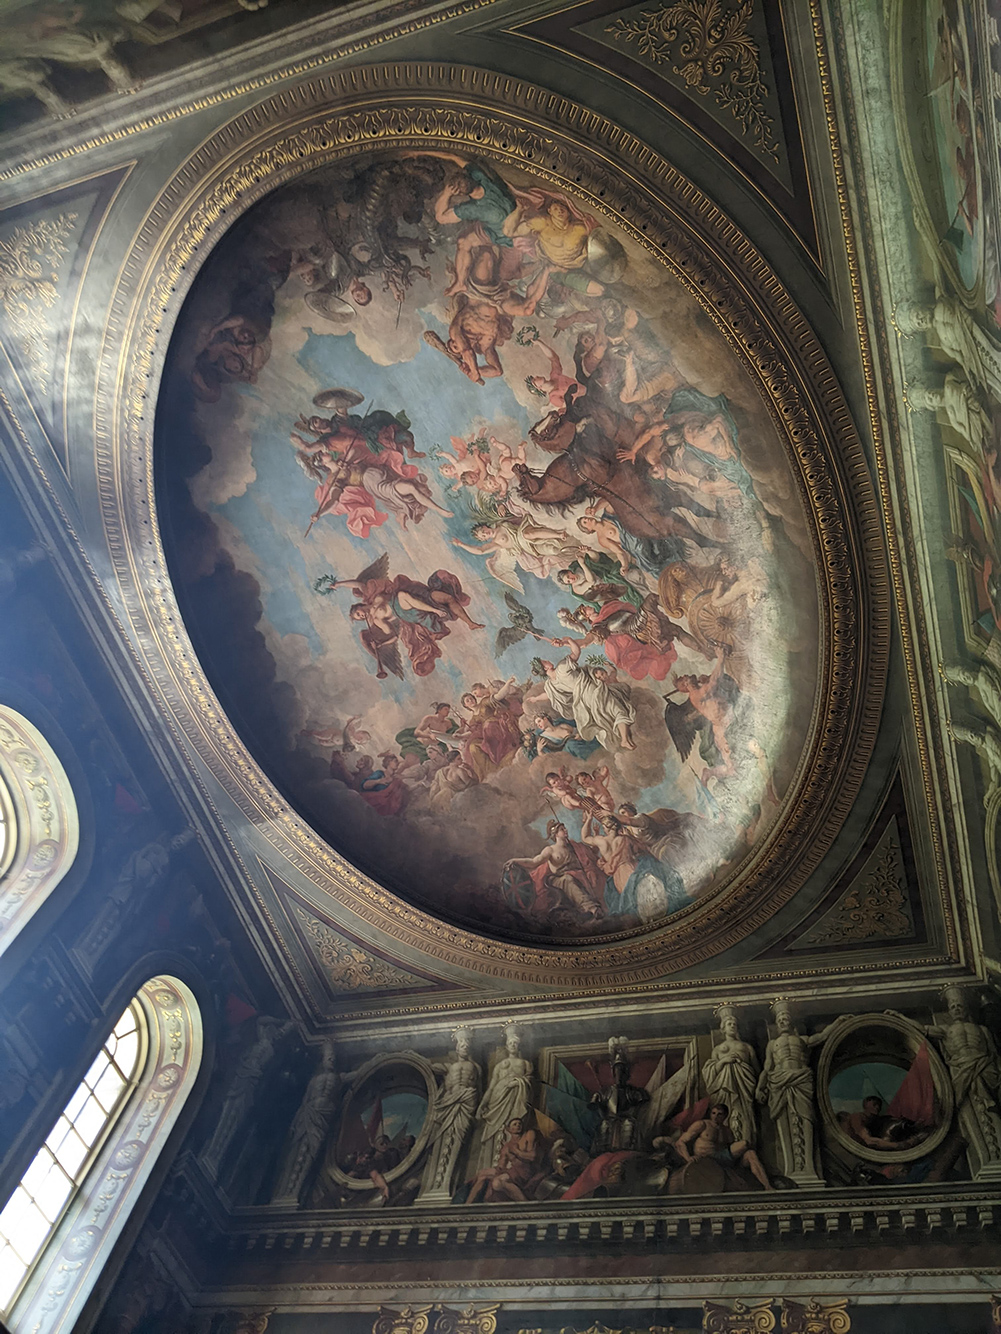 A photo of a painted mural on the ceiling at Blenheim Palace